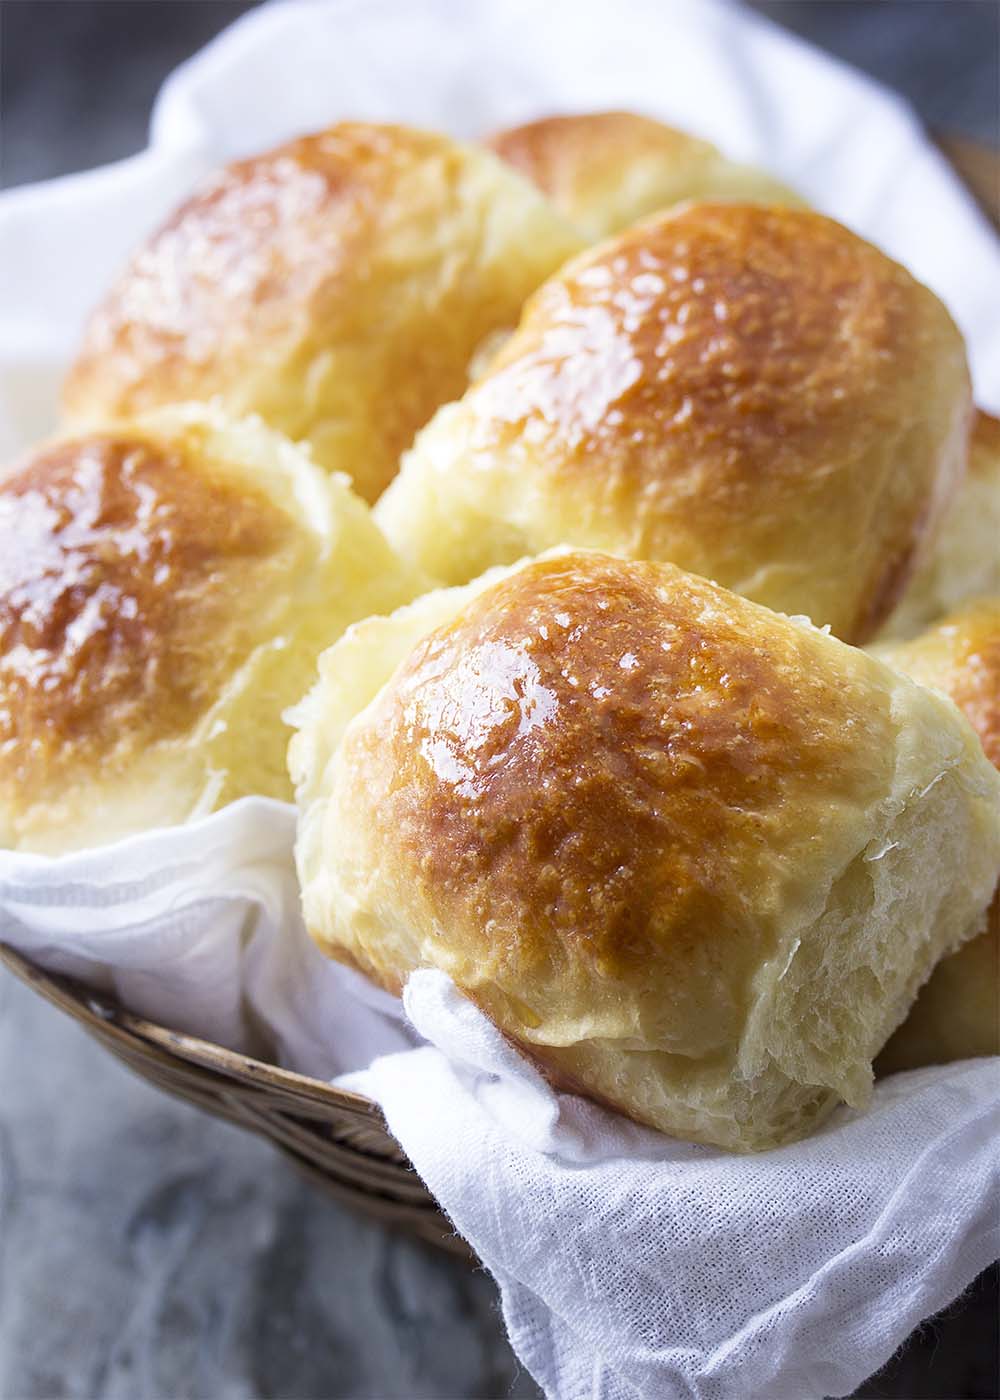 A basket lined with a white cloth and filled with soft and fluffy no-knead dinner rolls.